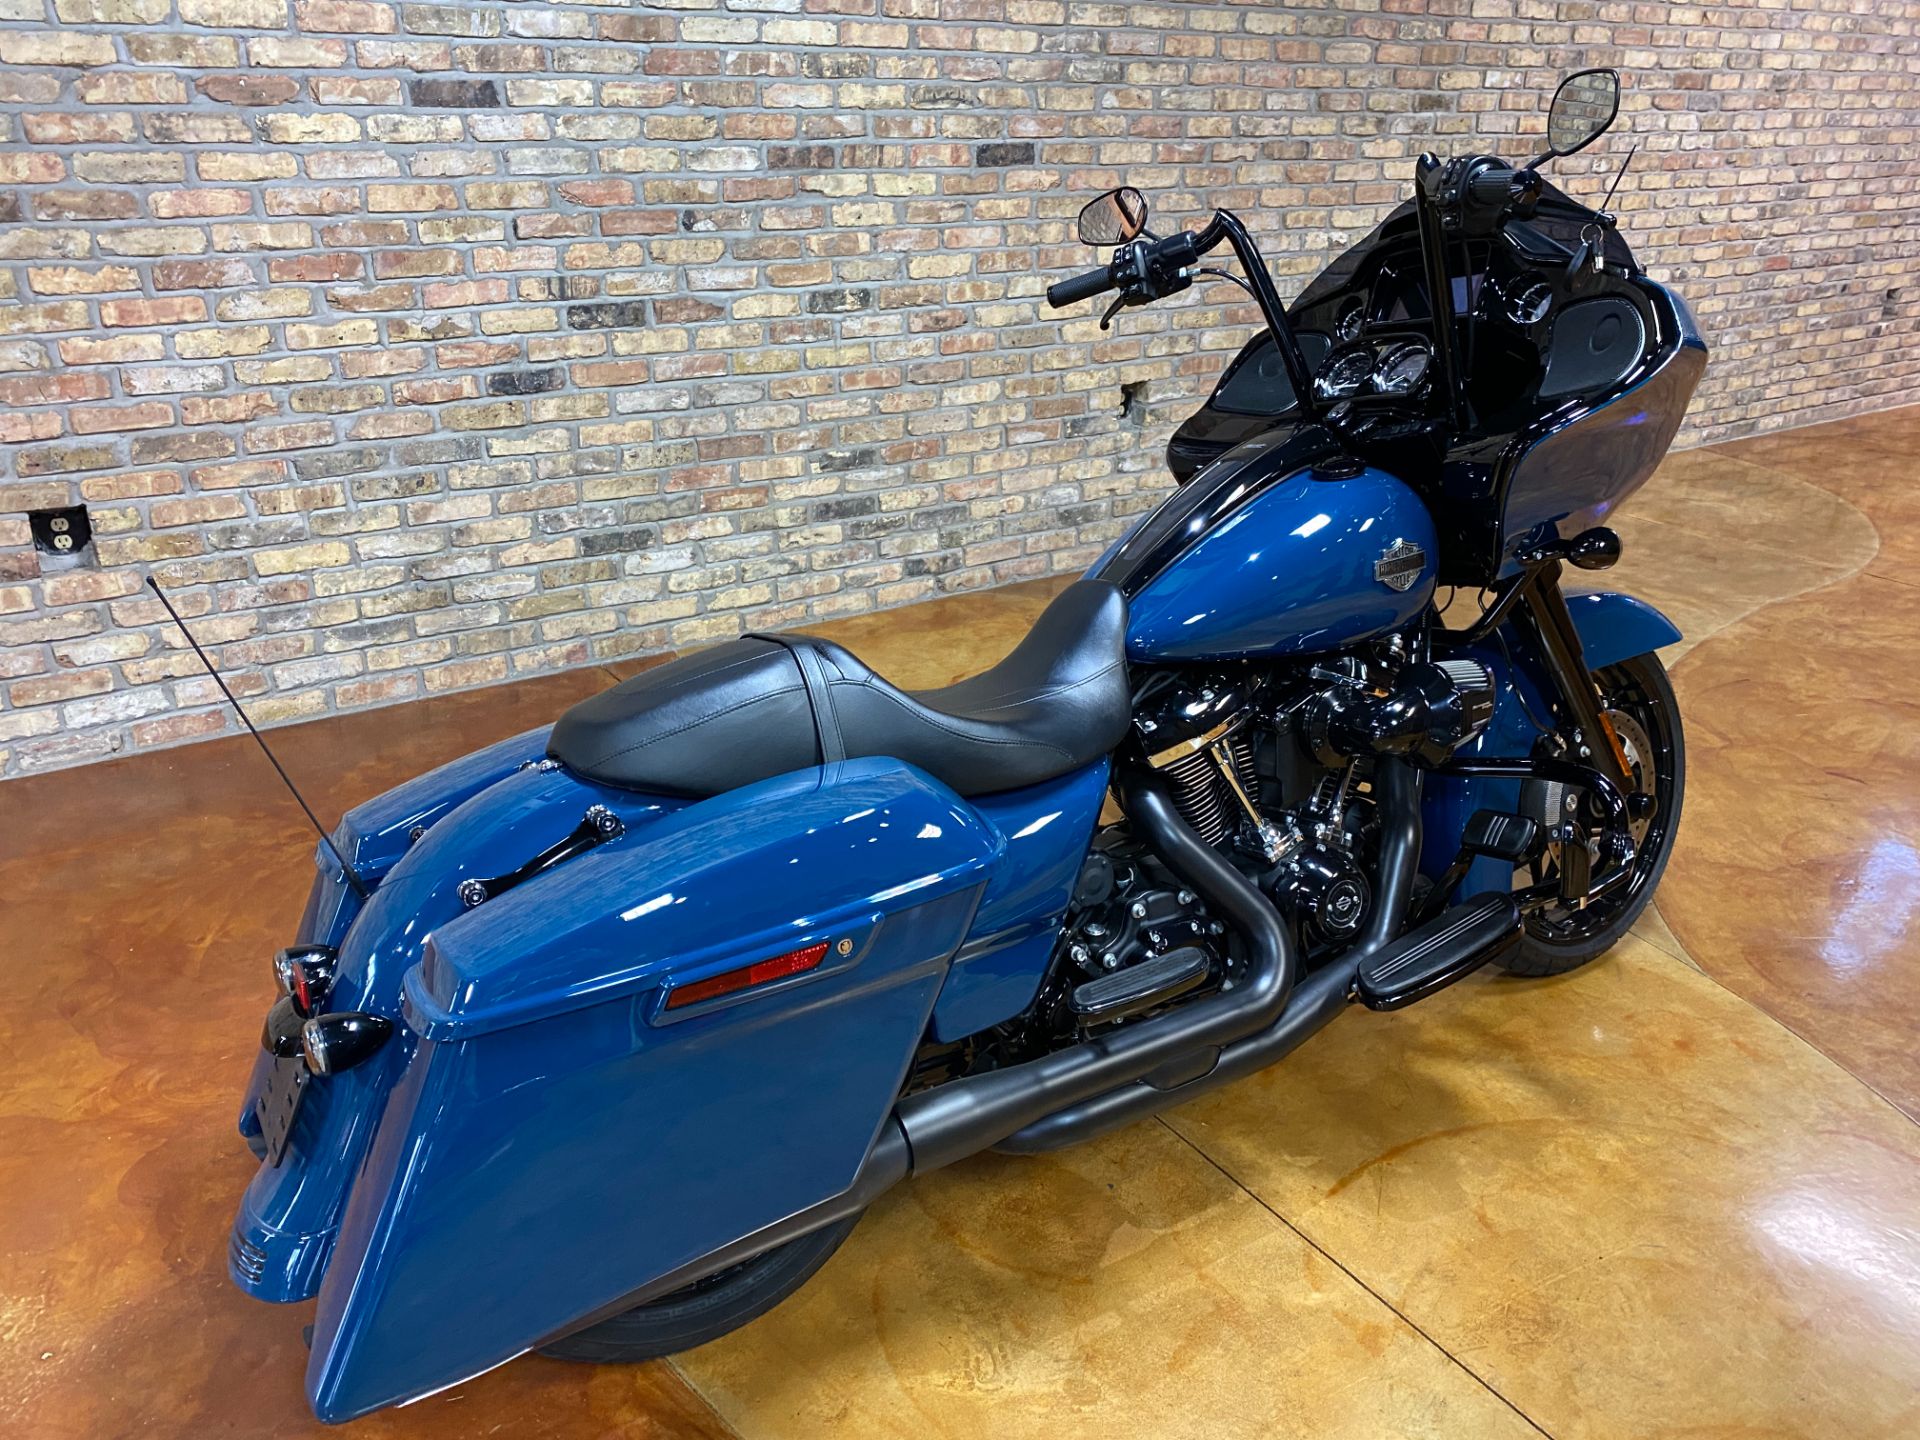 2021 Harley-Davidson Road Glide® Special in Big Bend, Wisconsin - Photo 5